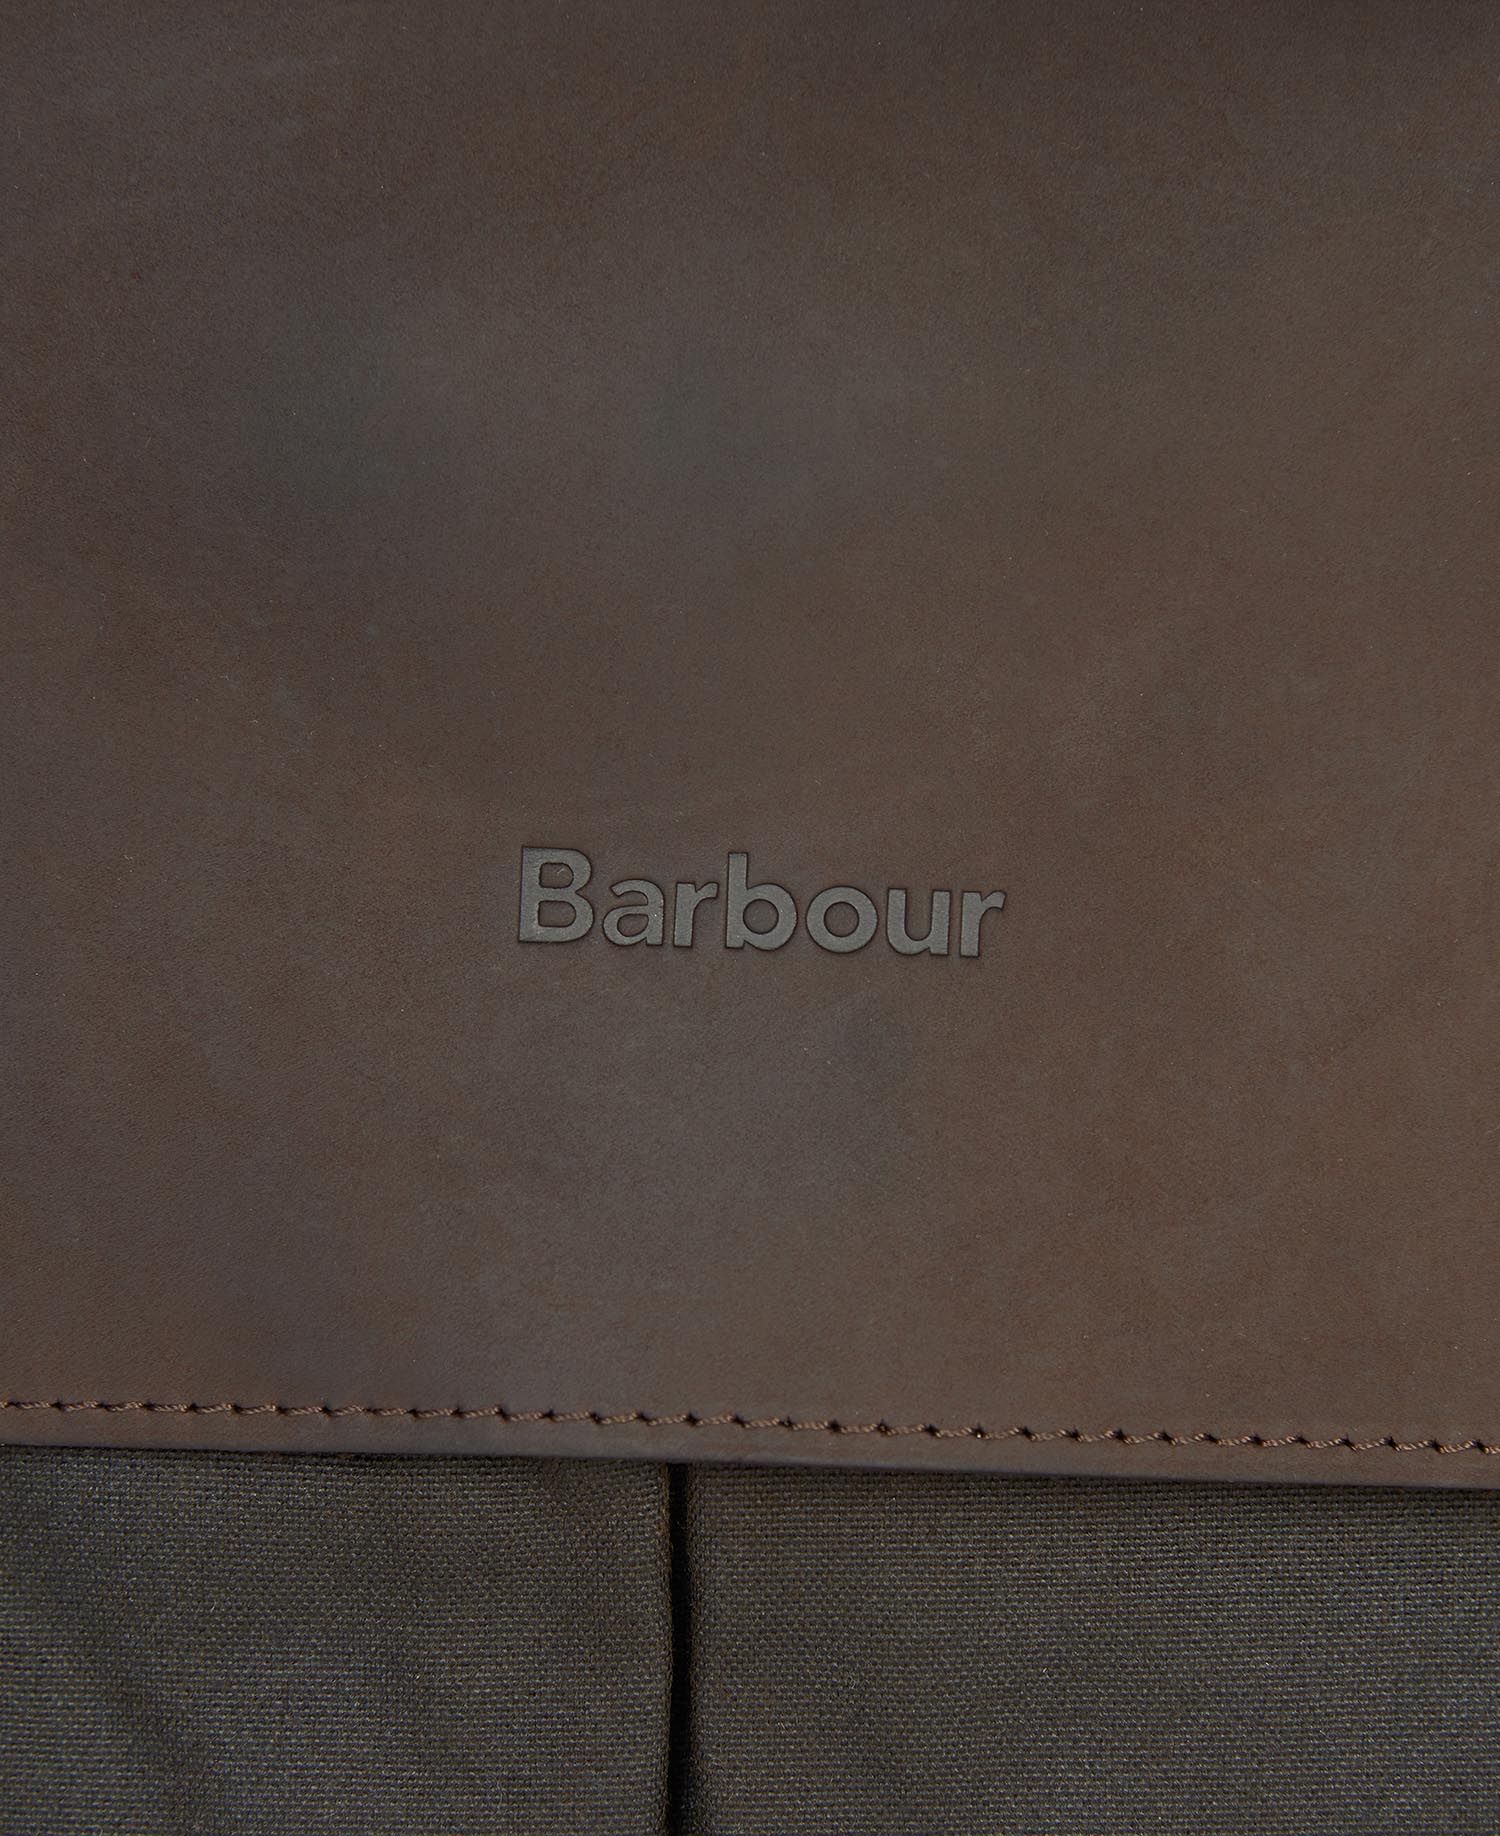 Barbour Wax Leather Briefcase in Navy